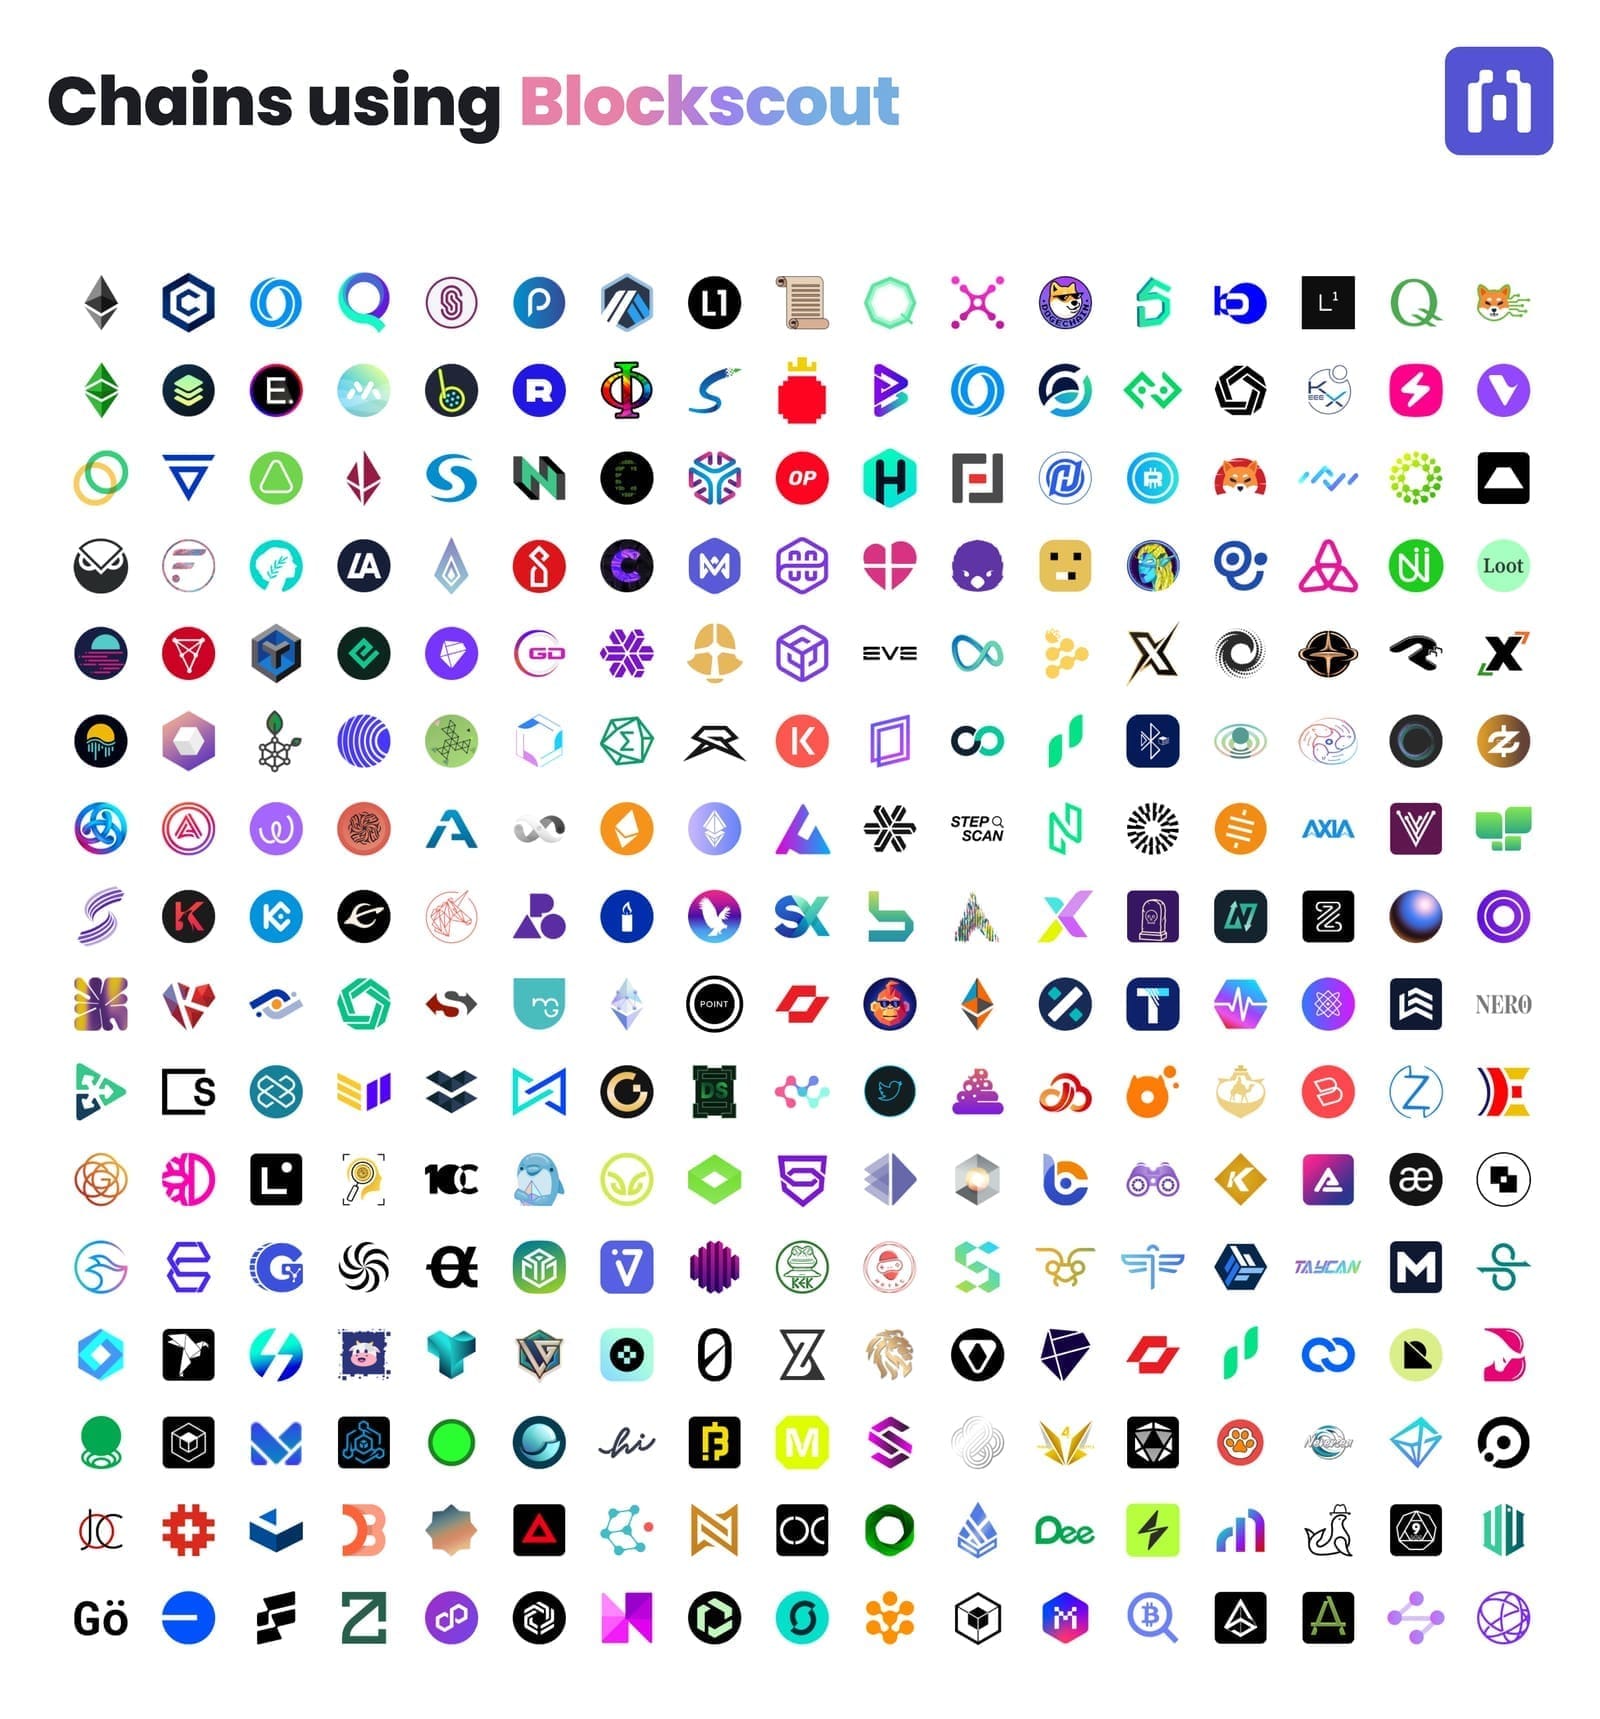 More than 500 chains trust Blockscout